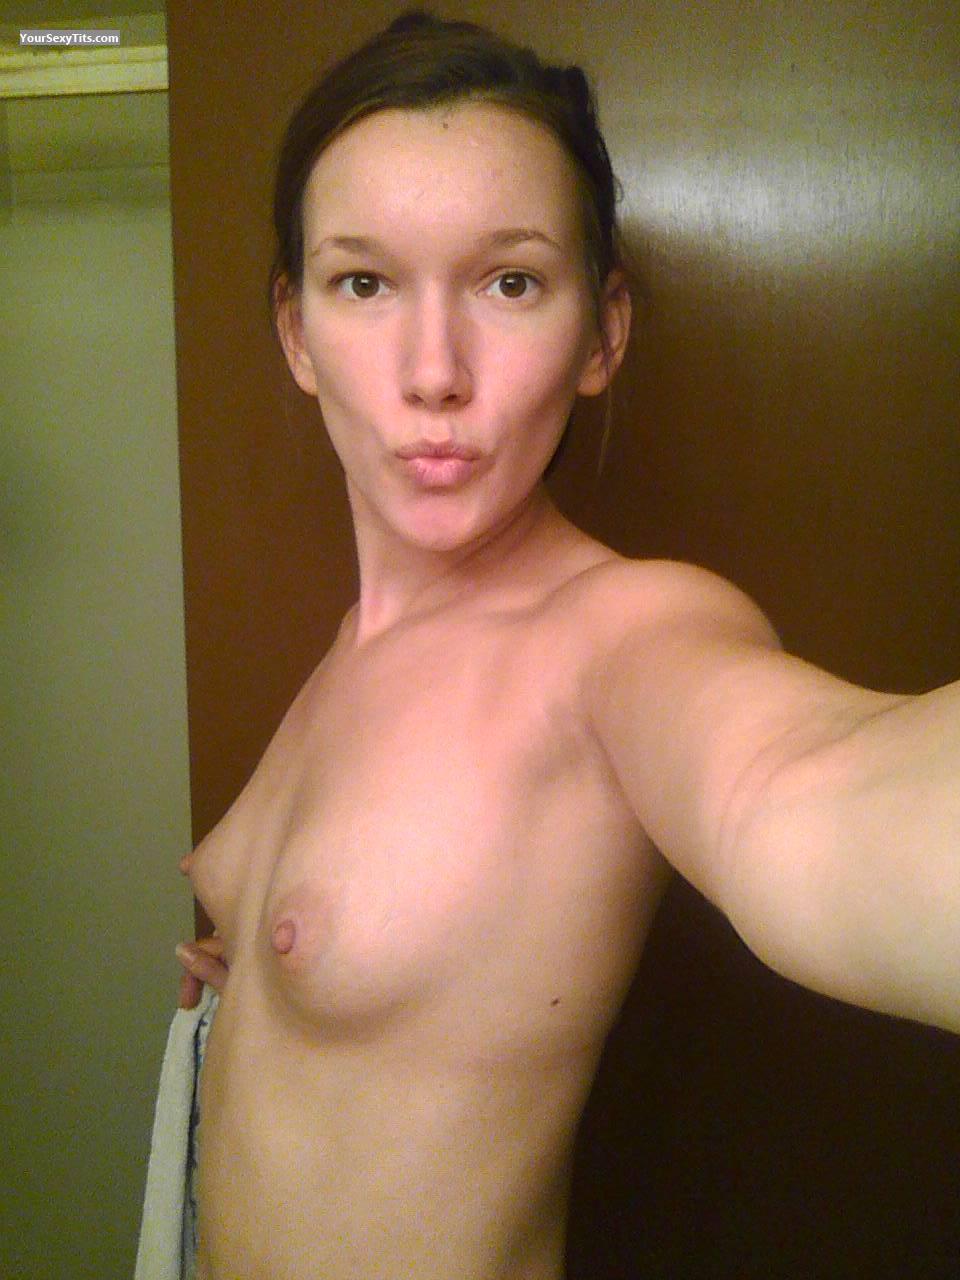 Tit Flash: My Very Small Tits (Selfie) - Topless College Girl from United States